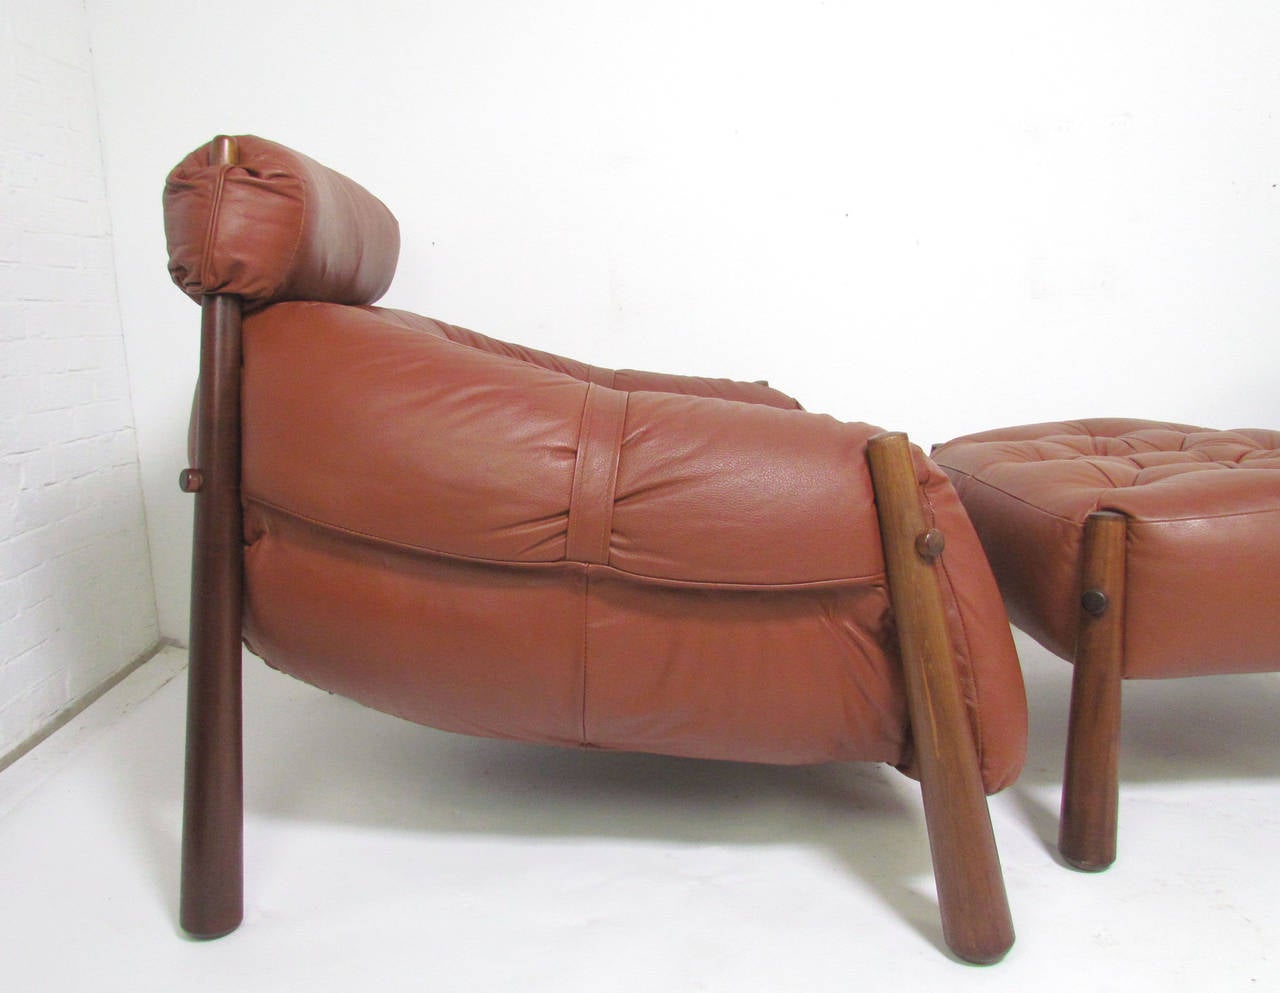 Pair of lounge chairs in leather designed by Percival Lafer for Lafer S.A. Industries, Brazil, circa 1958. Reverse tapered splayed legs in jacaranda (Brazilian rosewood). 

A virtual time capsule in terms of condition, these pieces were kept